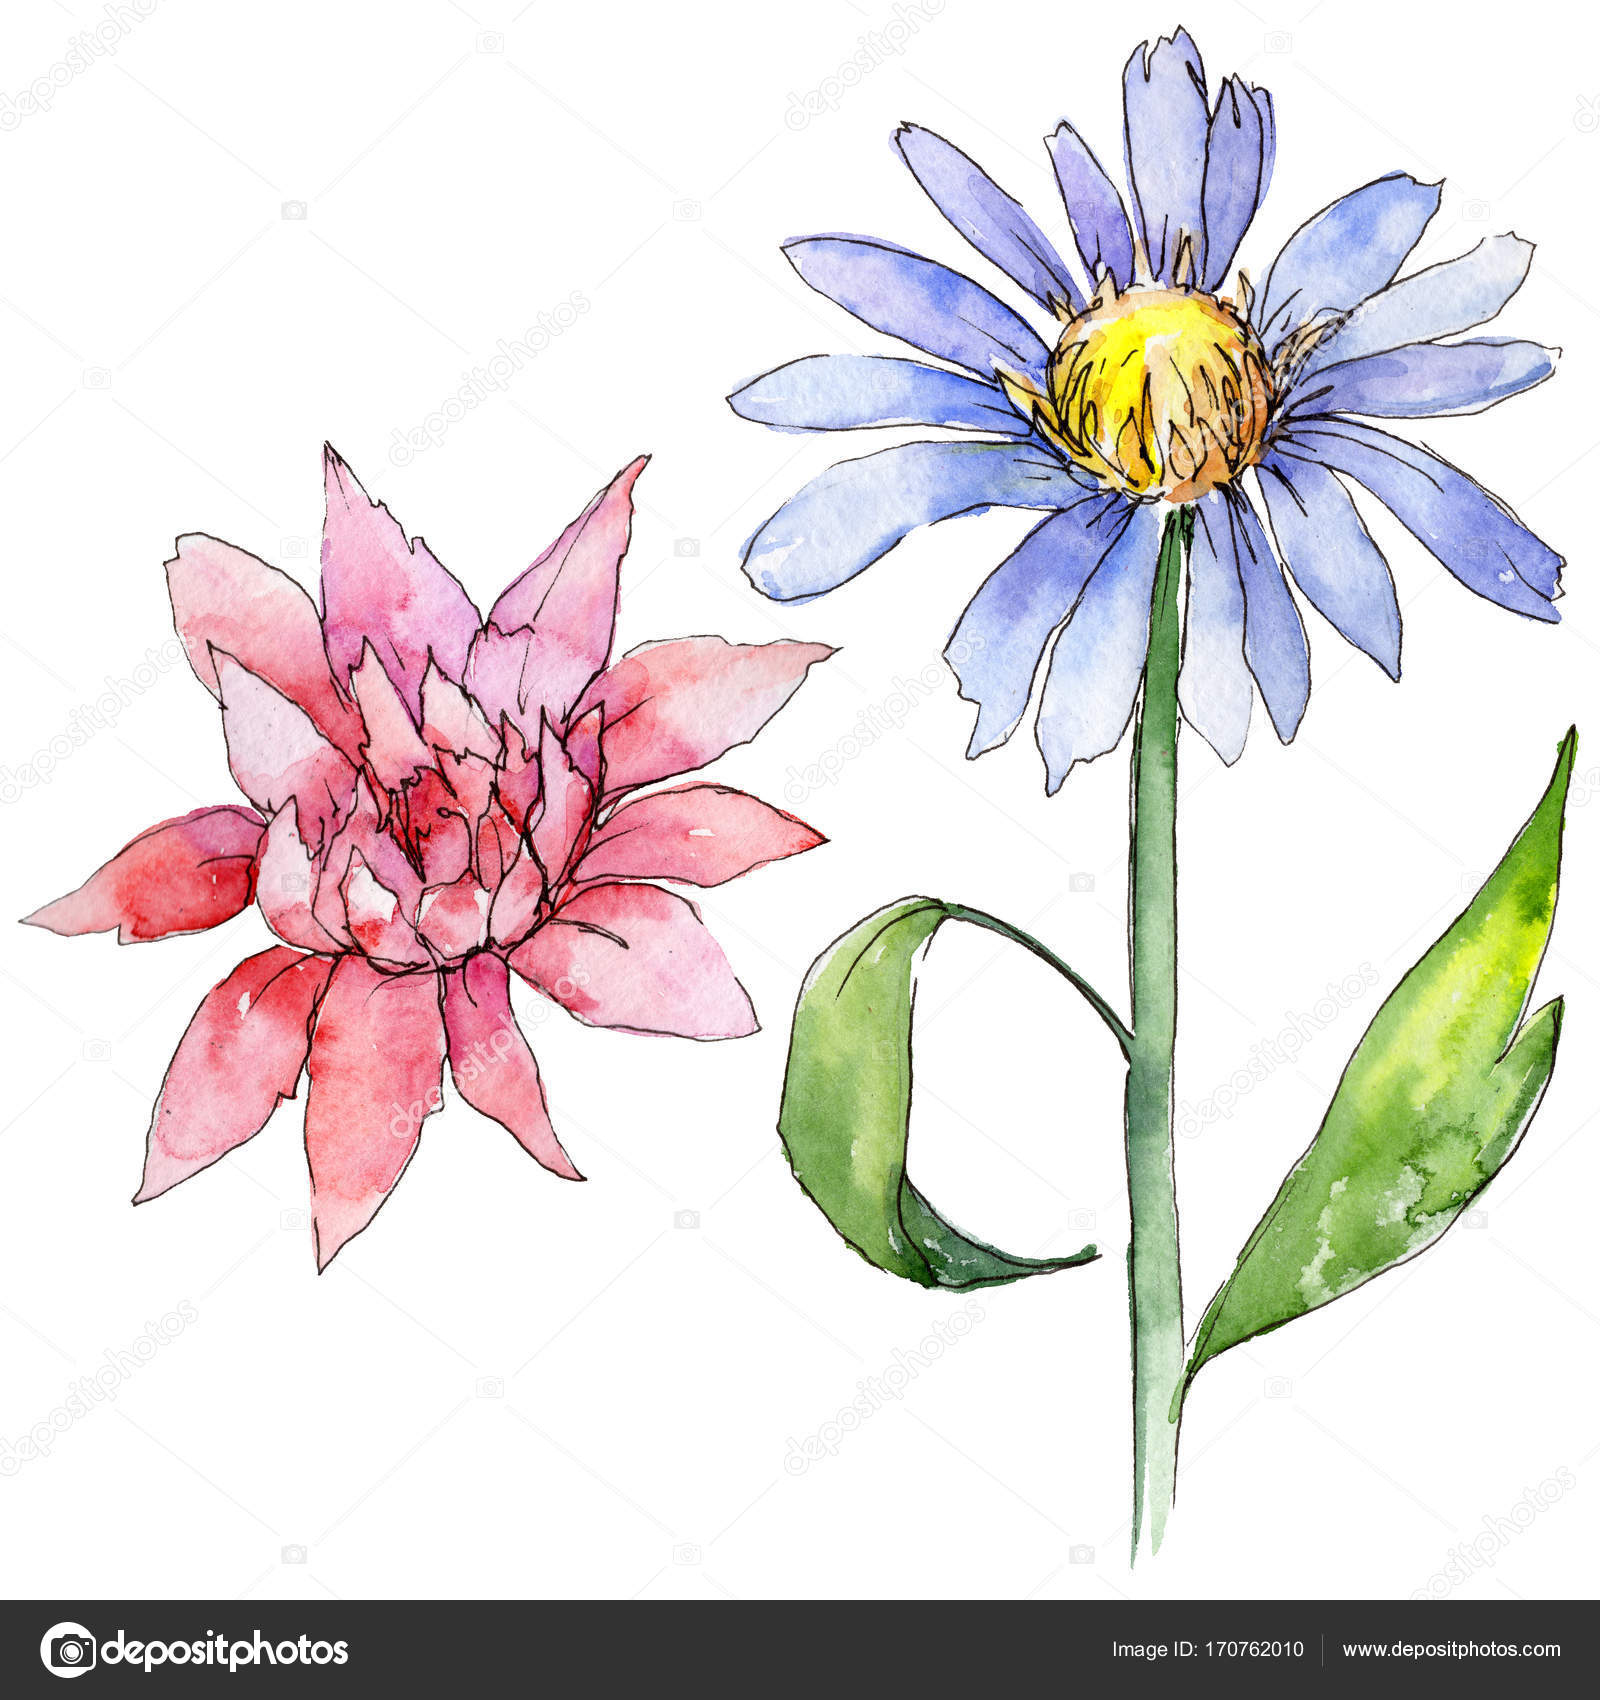 Wildflower Aster Flower In A Watercolor Style Isolated Stock Photo C Mystocks 170762010,Chicken Breast Calories